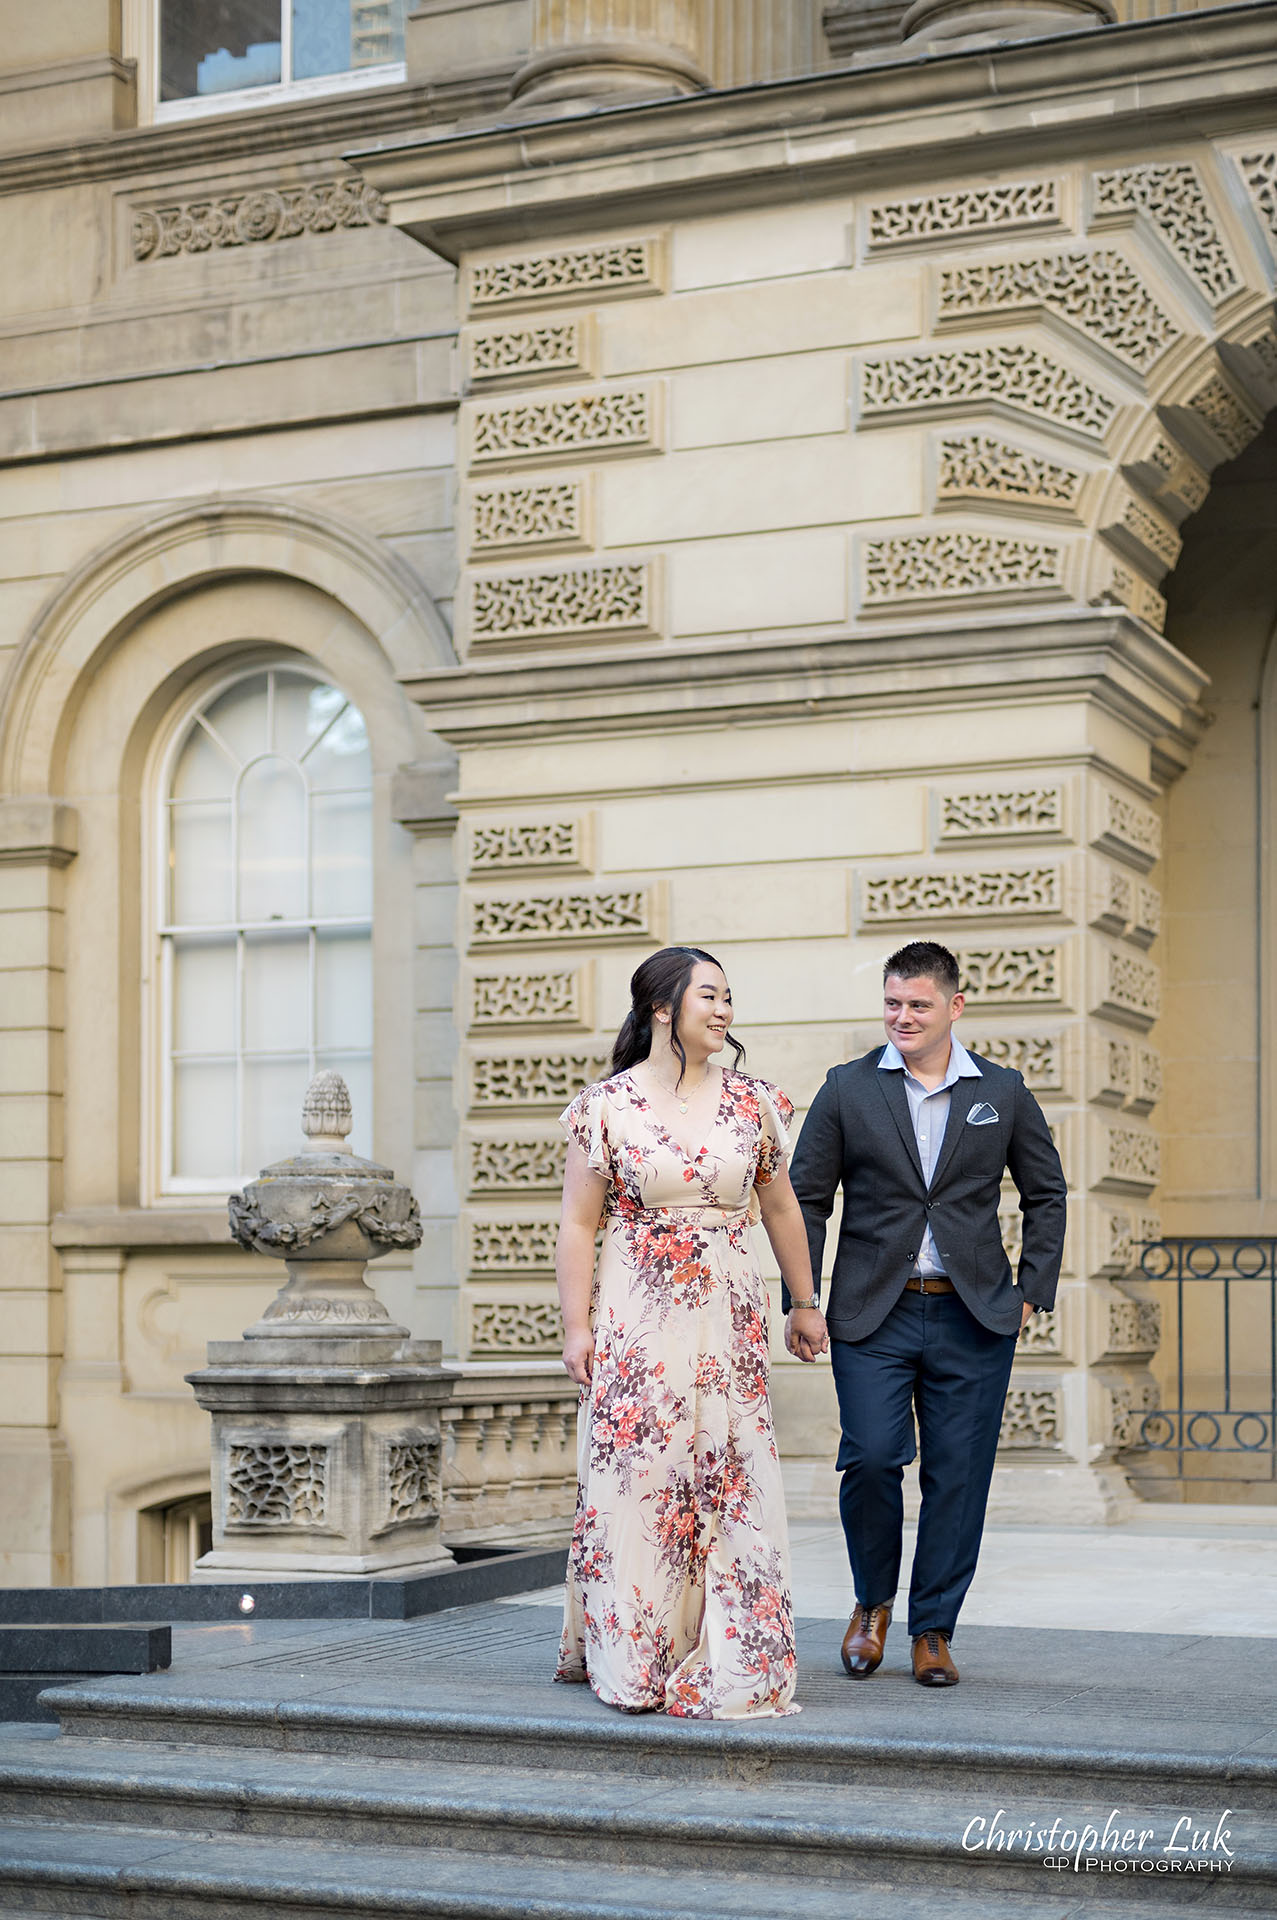 Christopher Luk Toronto Wedding Photographer Engagement Photos Pictures Session Osgoode Hall Nathan Philips Square City Hall Bride Groom Natural Candid Photojournalistic Organic Sunset Holding Hands Walking Together Stairs Staircase Steps